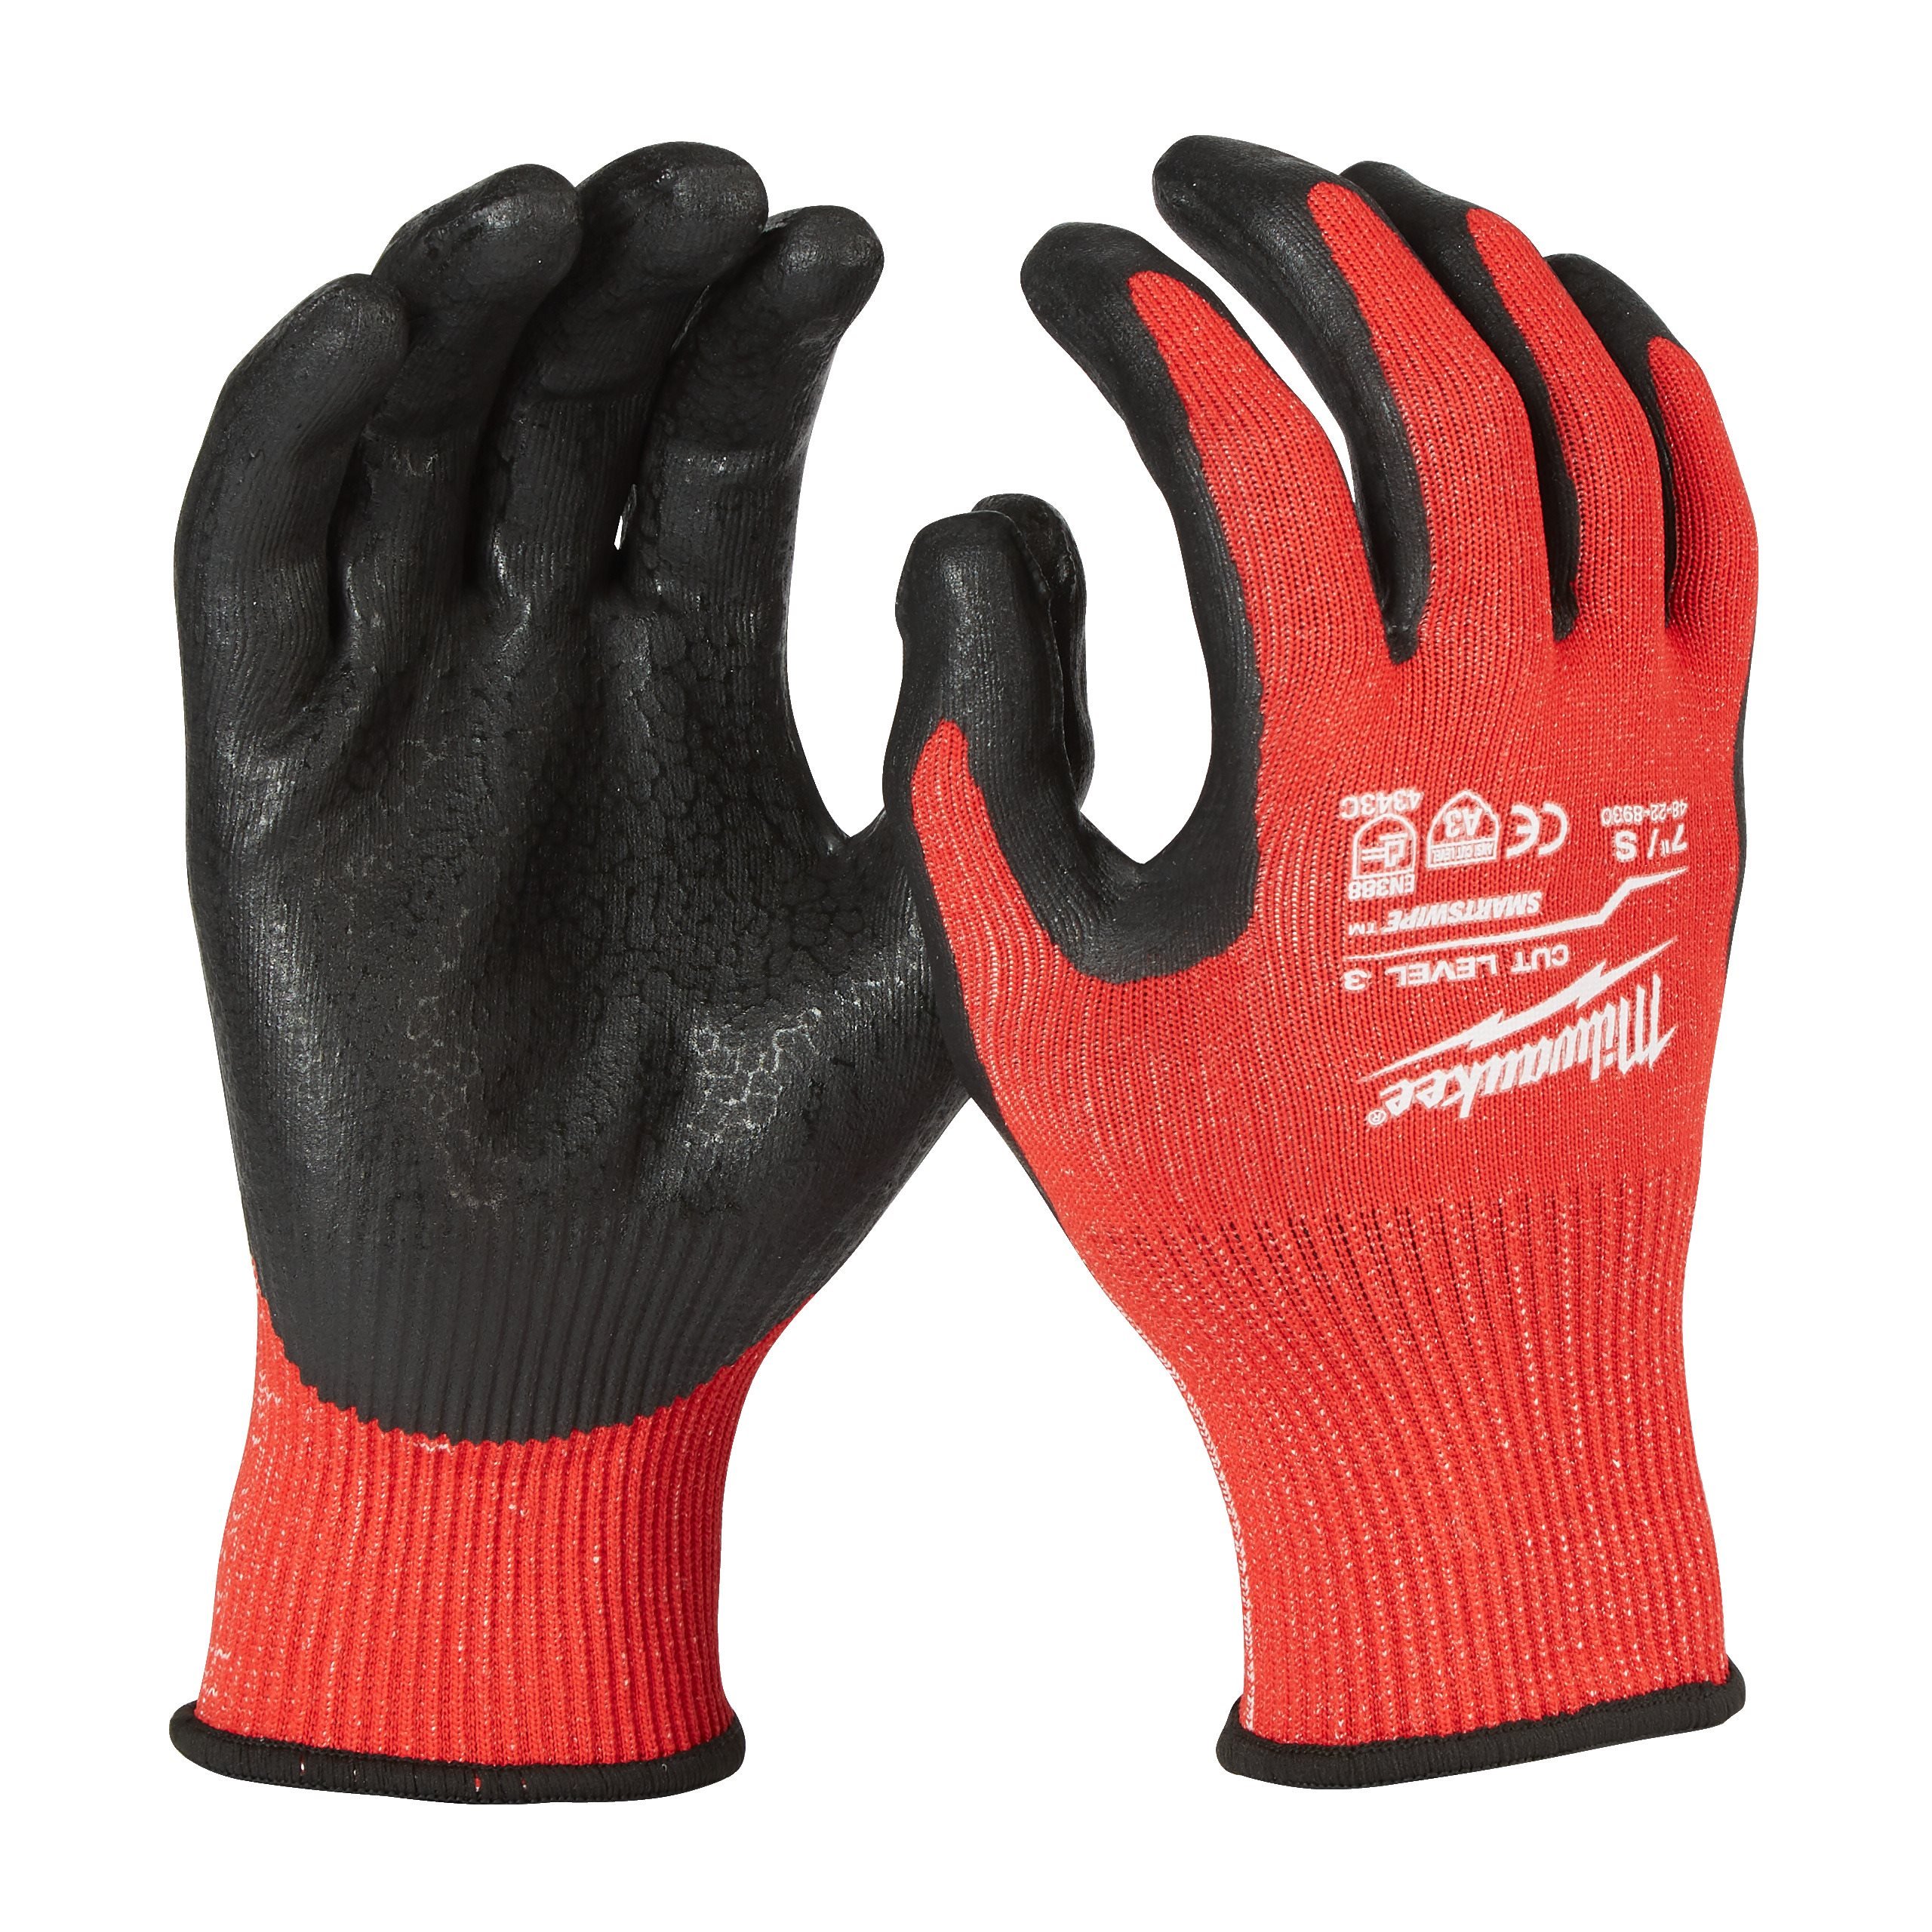 Cut level 3/C dipped gloves